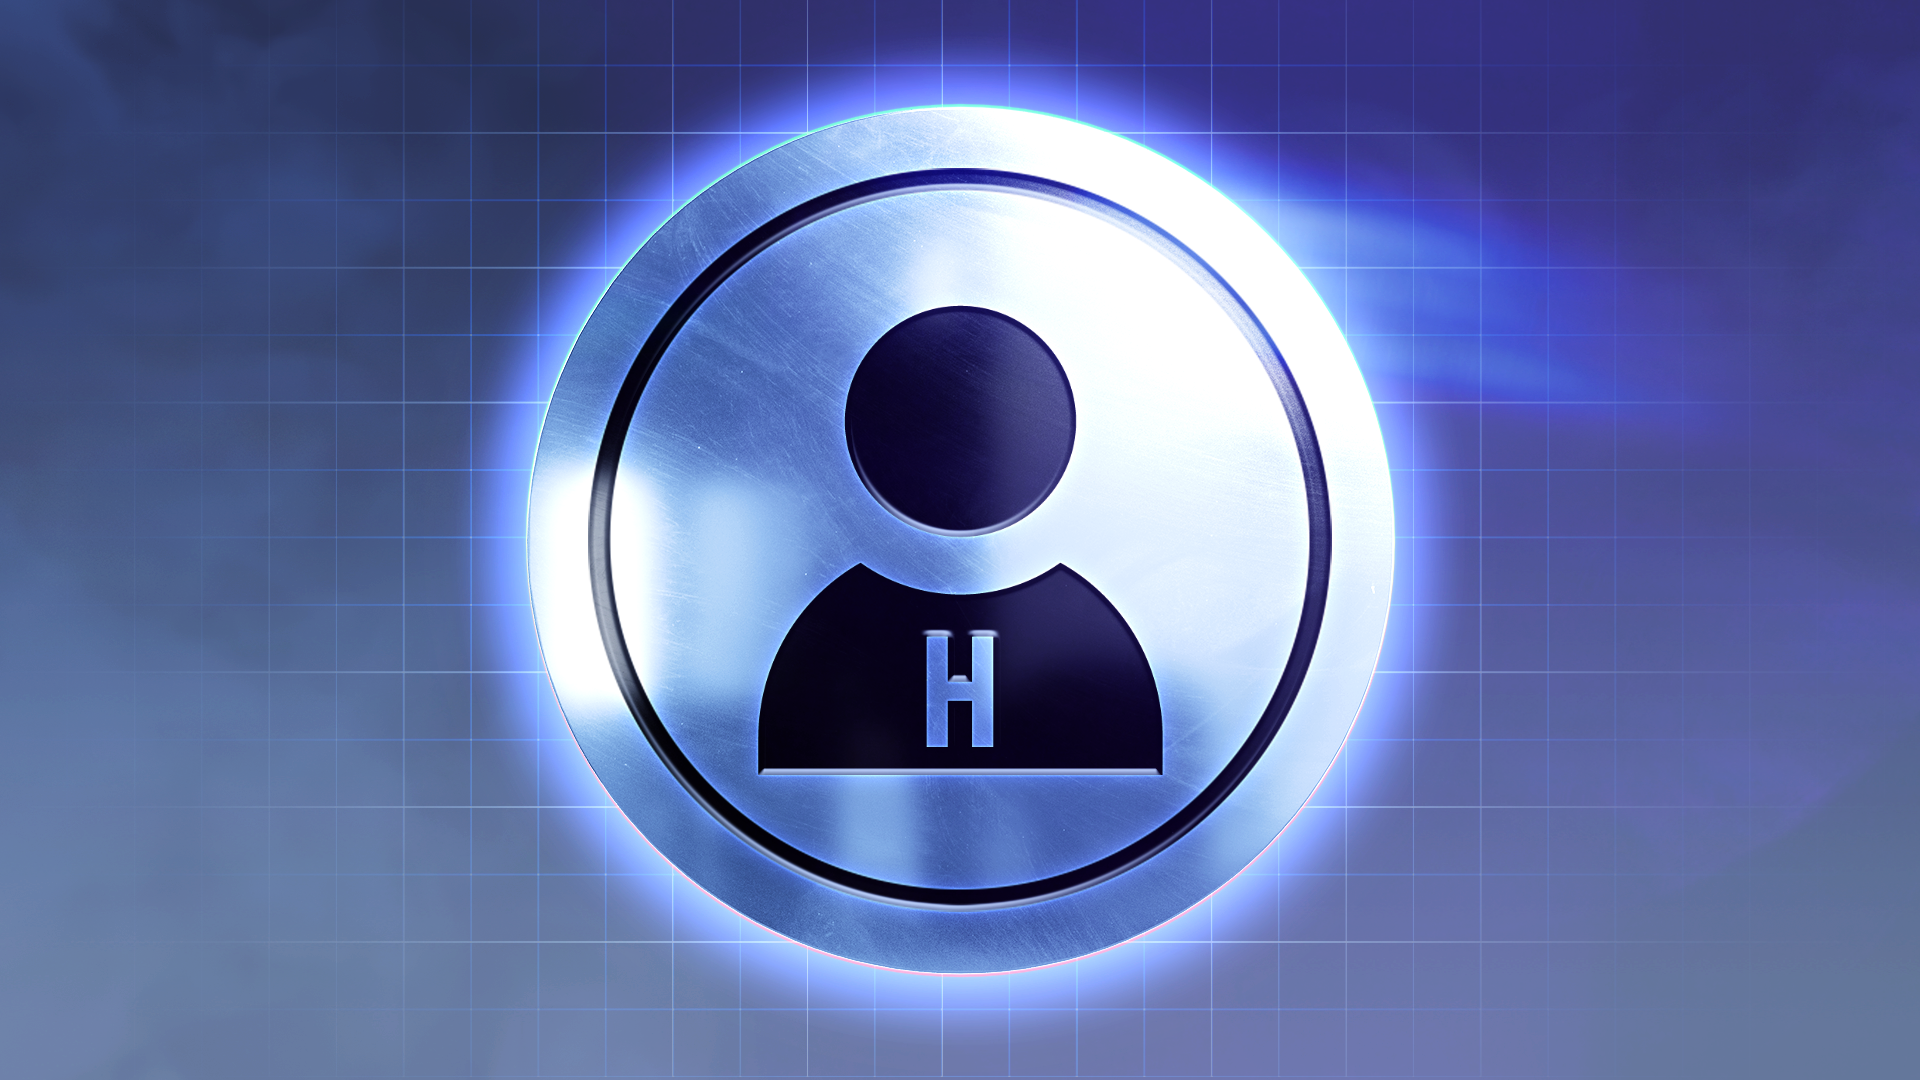 Icon for Play The Heavy